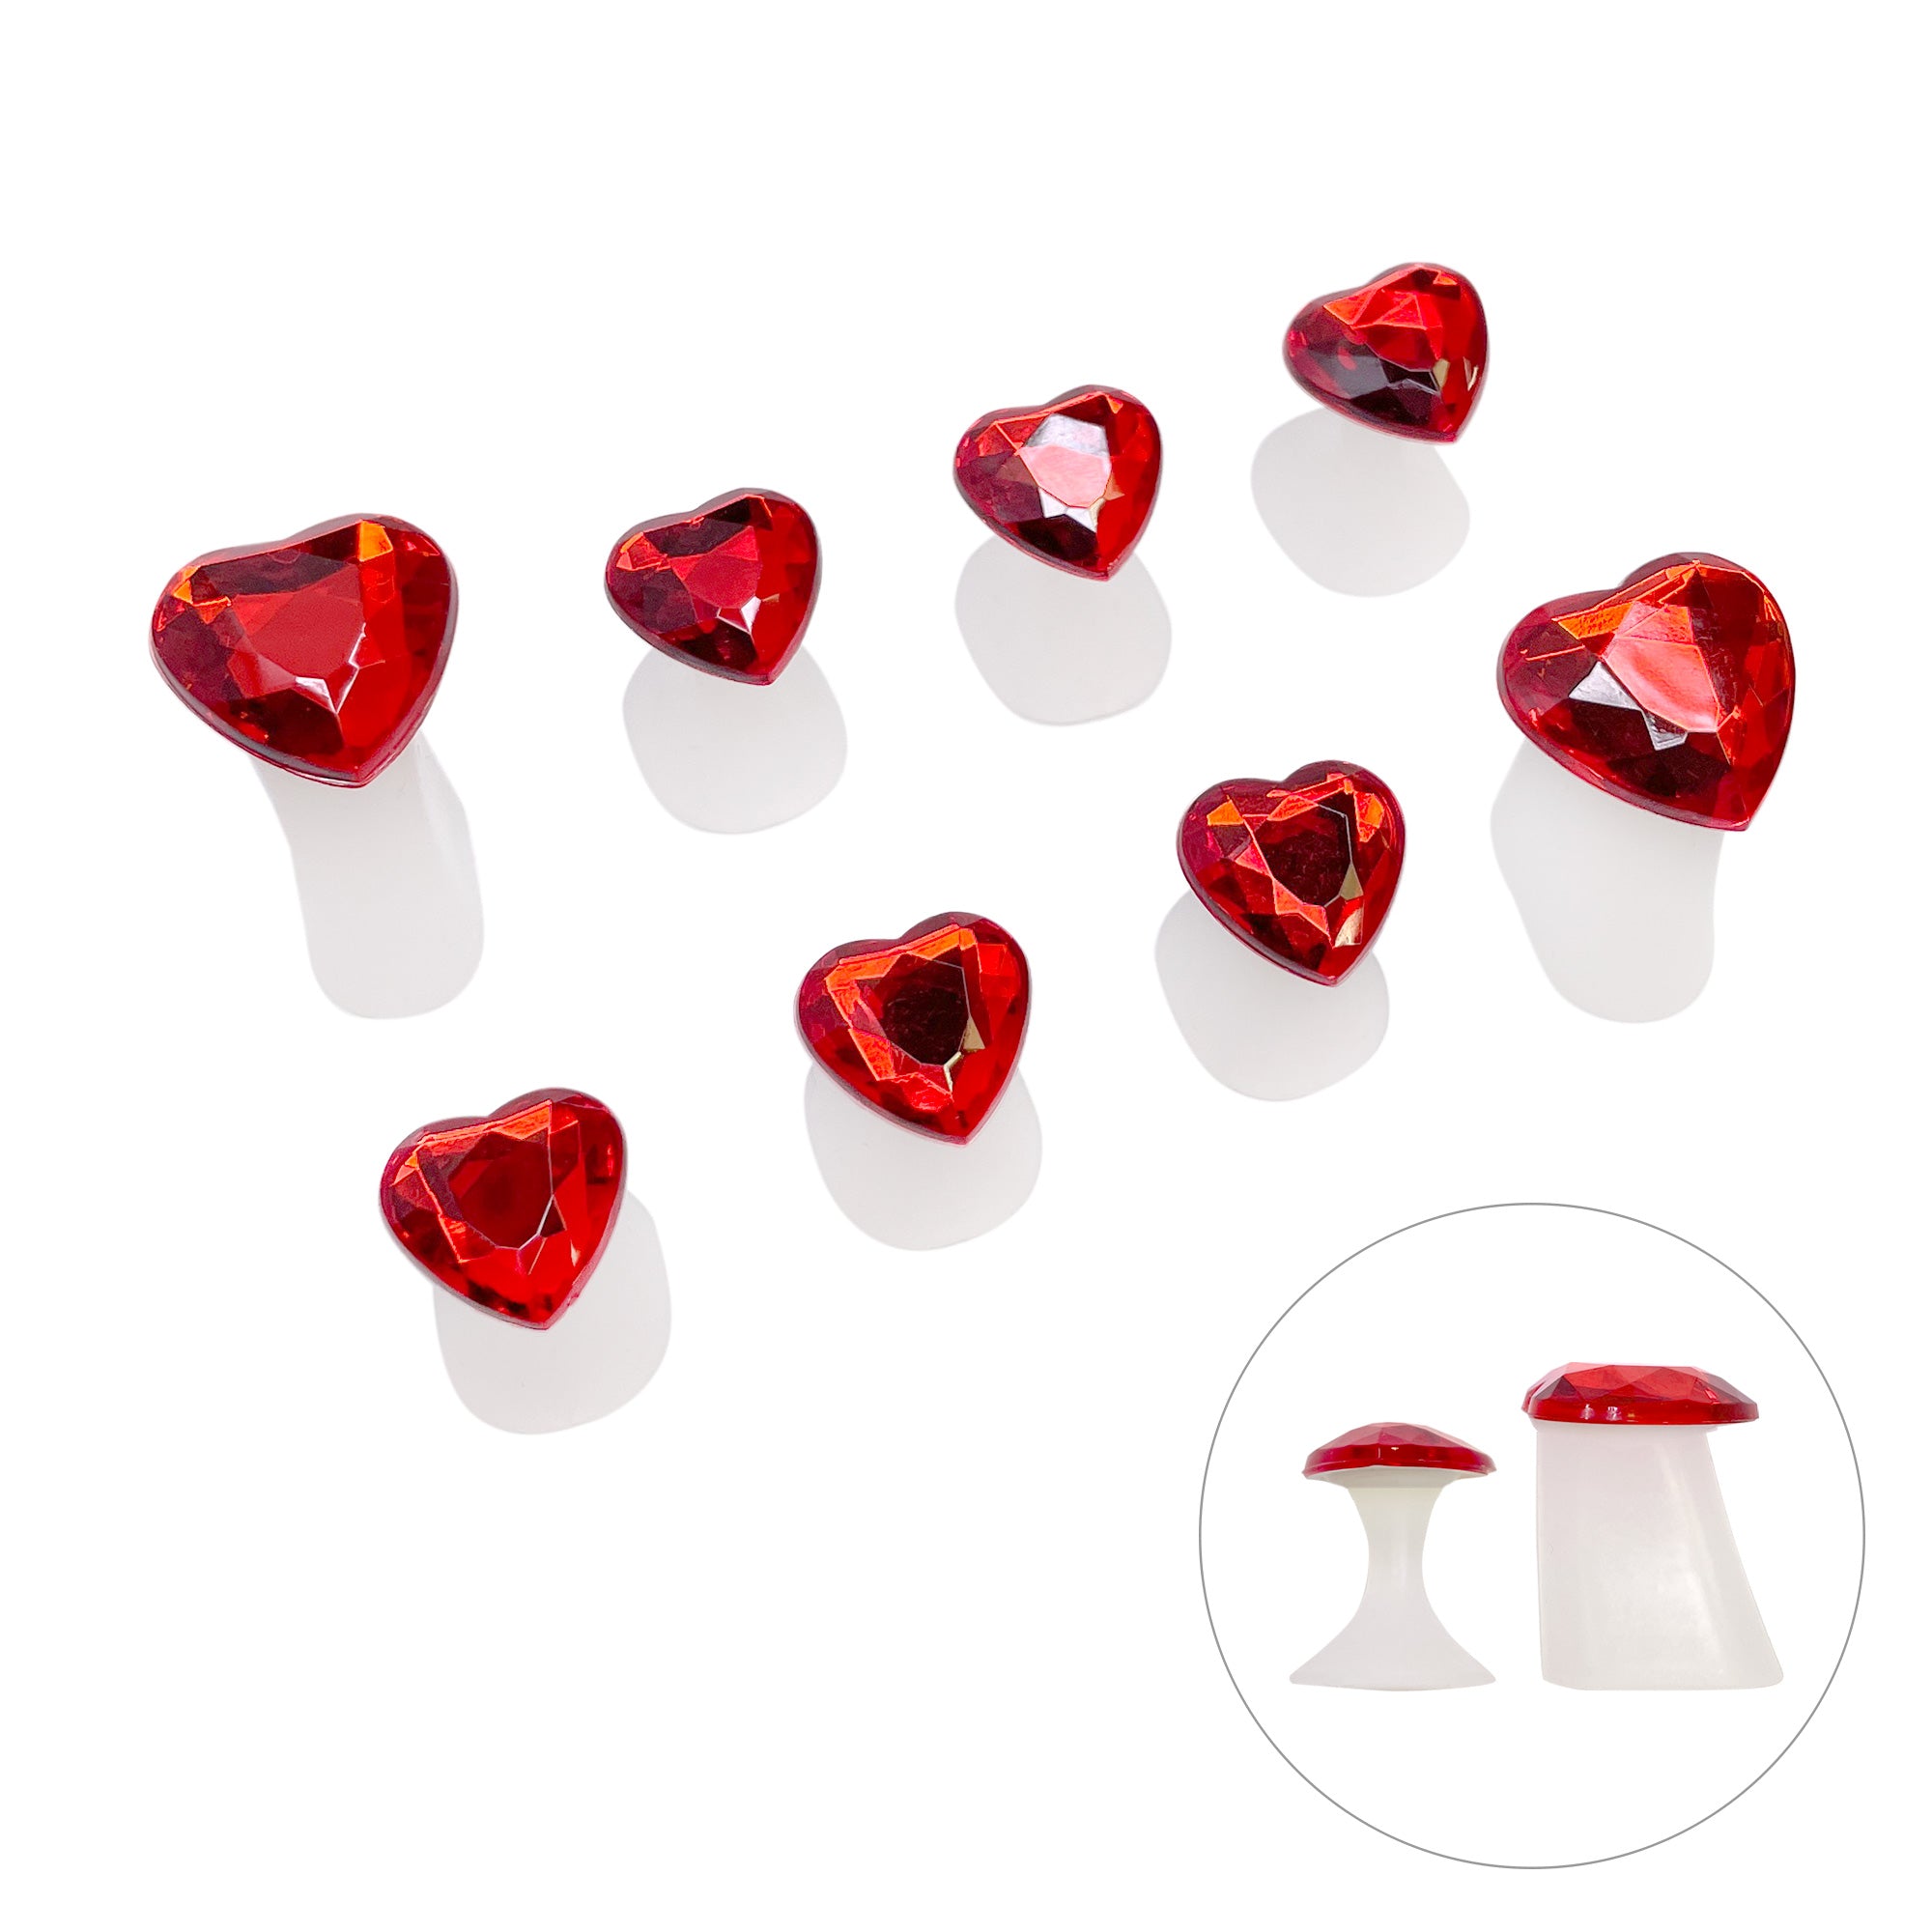 Soft Silicone Pedicure Toe Separator Set / Red Heart Divider Spacer Pedicure At-Home